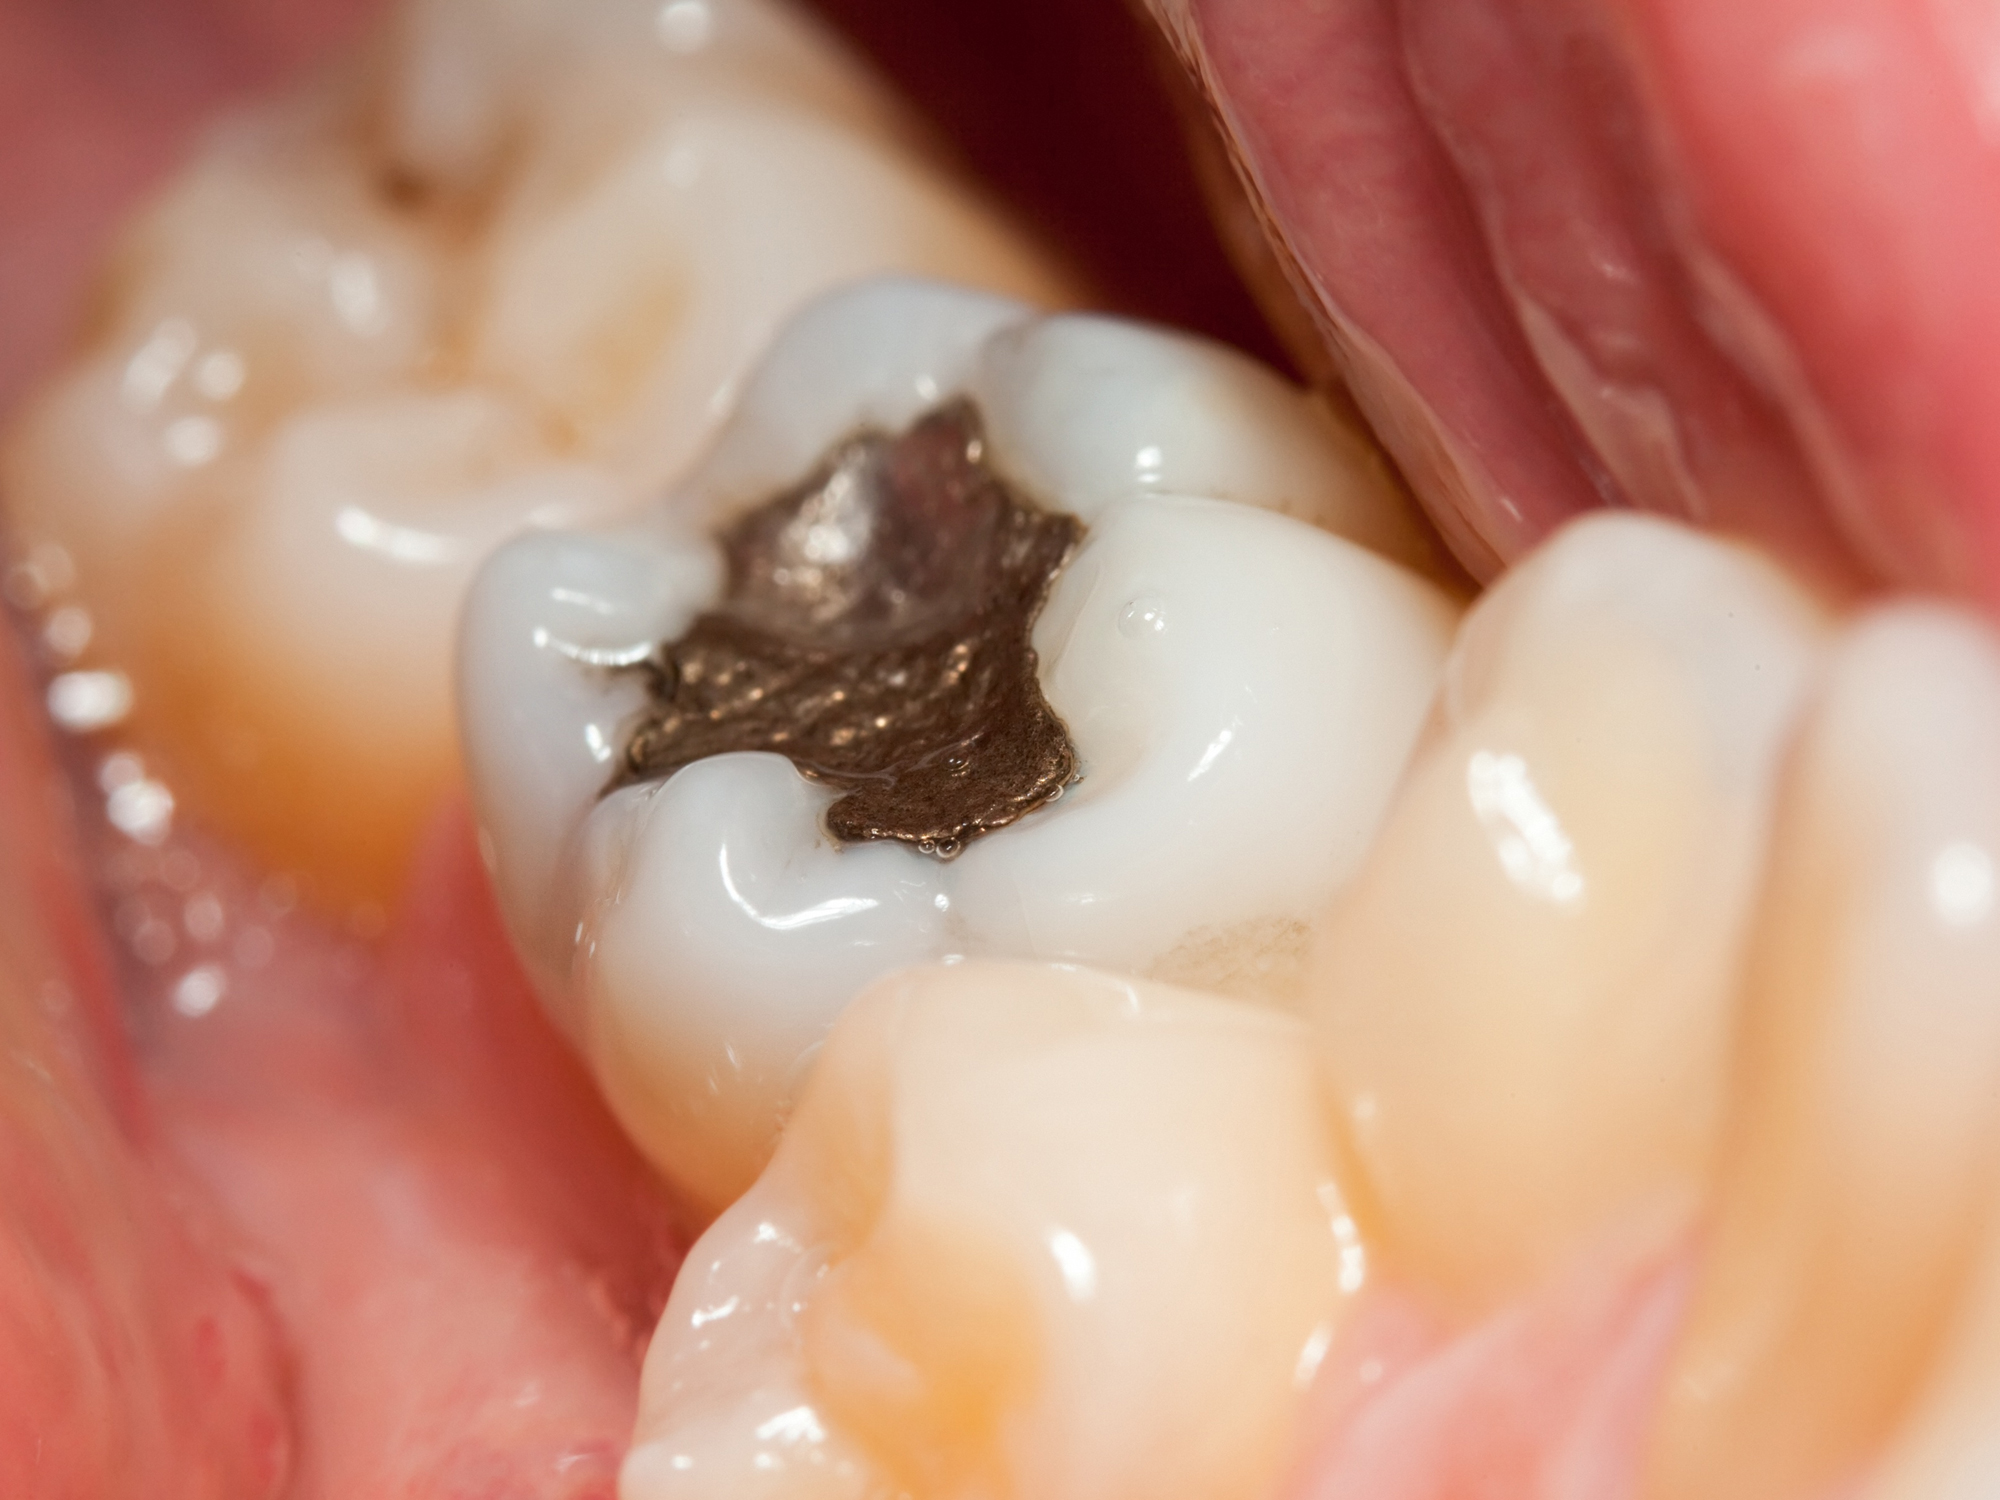 What to do about your toxic mercury fillings